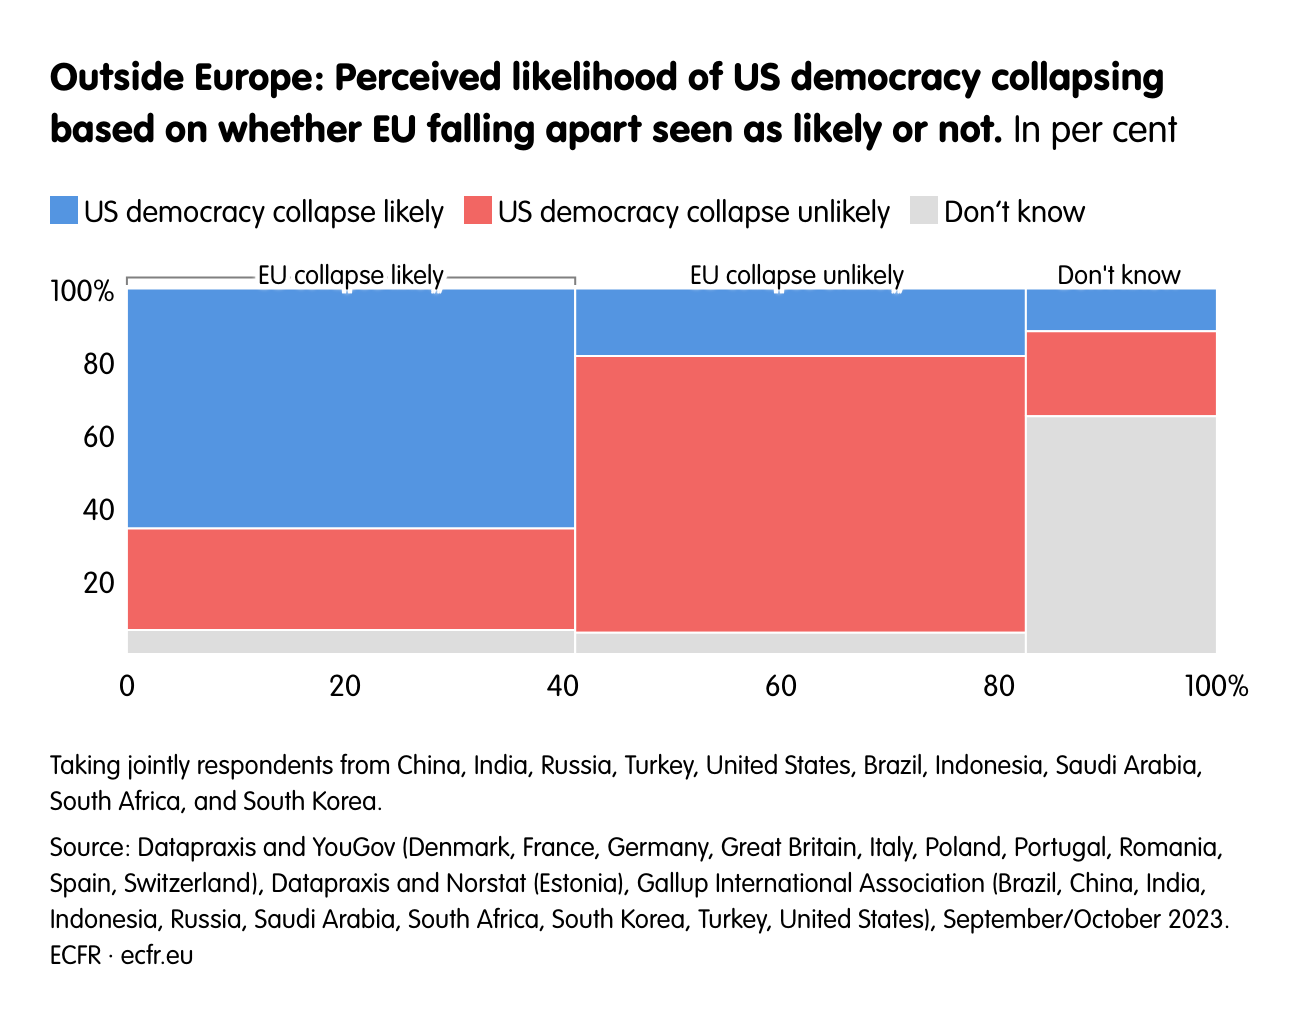 Outside Europe: Perceived likelihood of US democracy collapsing based on whether EU falling apart seen as likely or not.